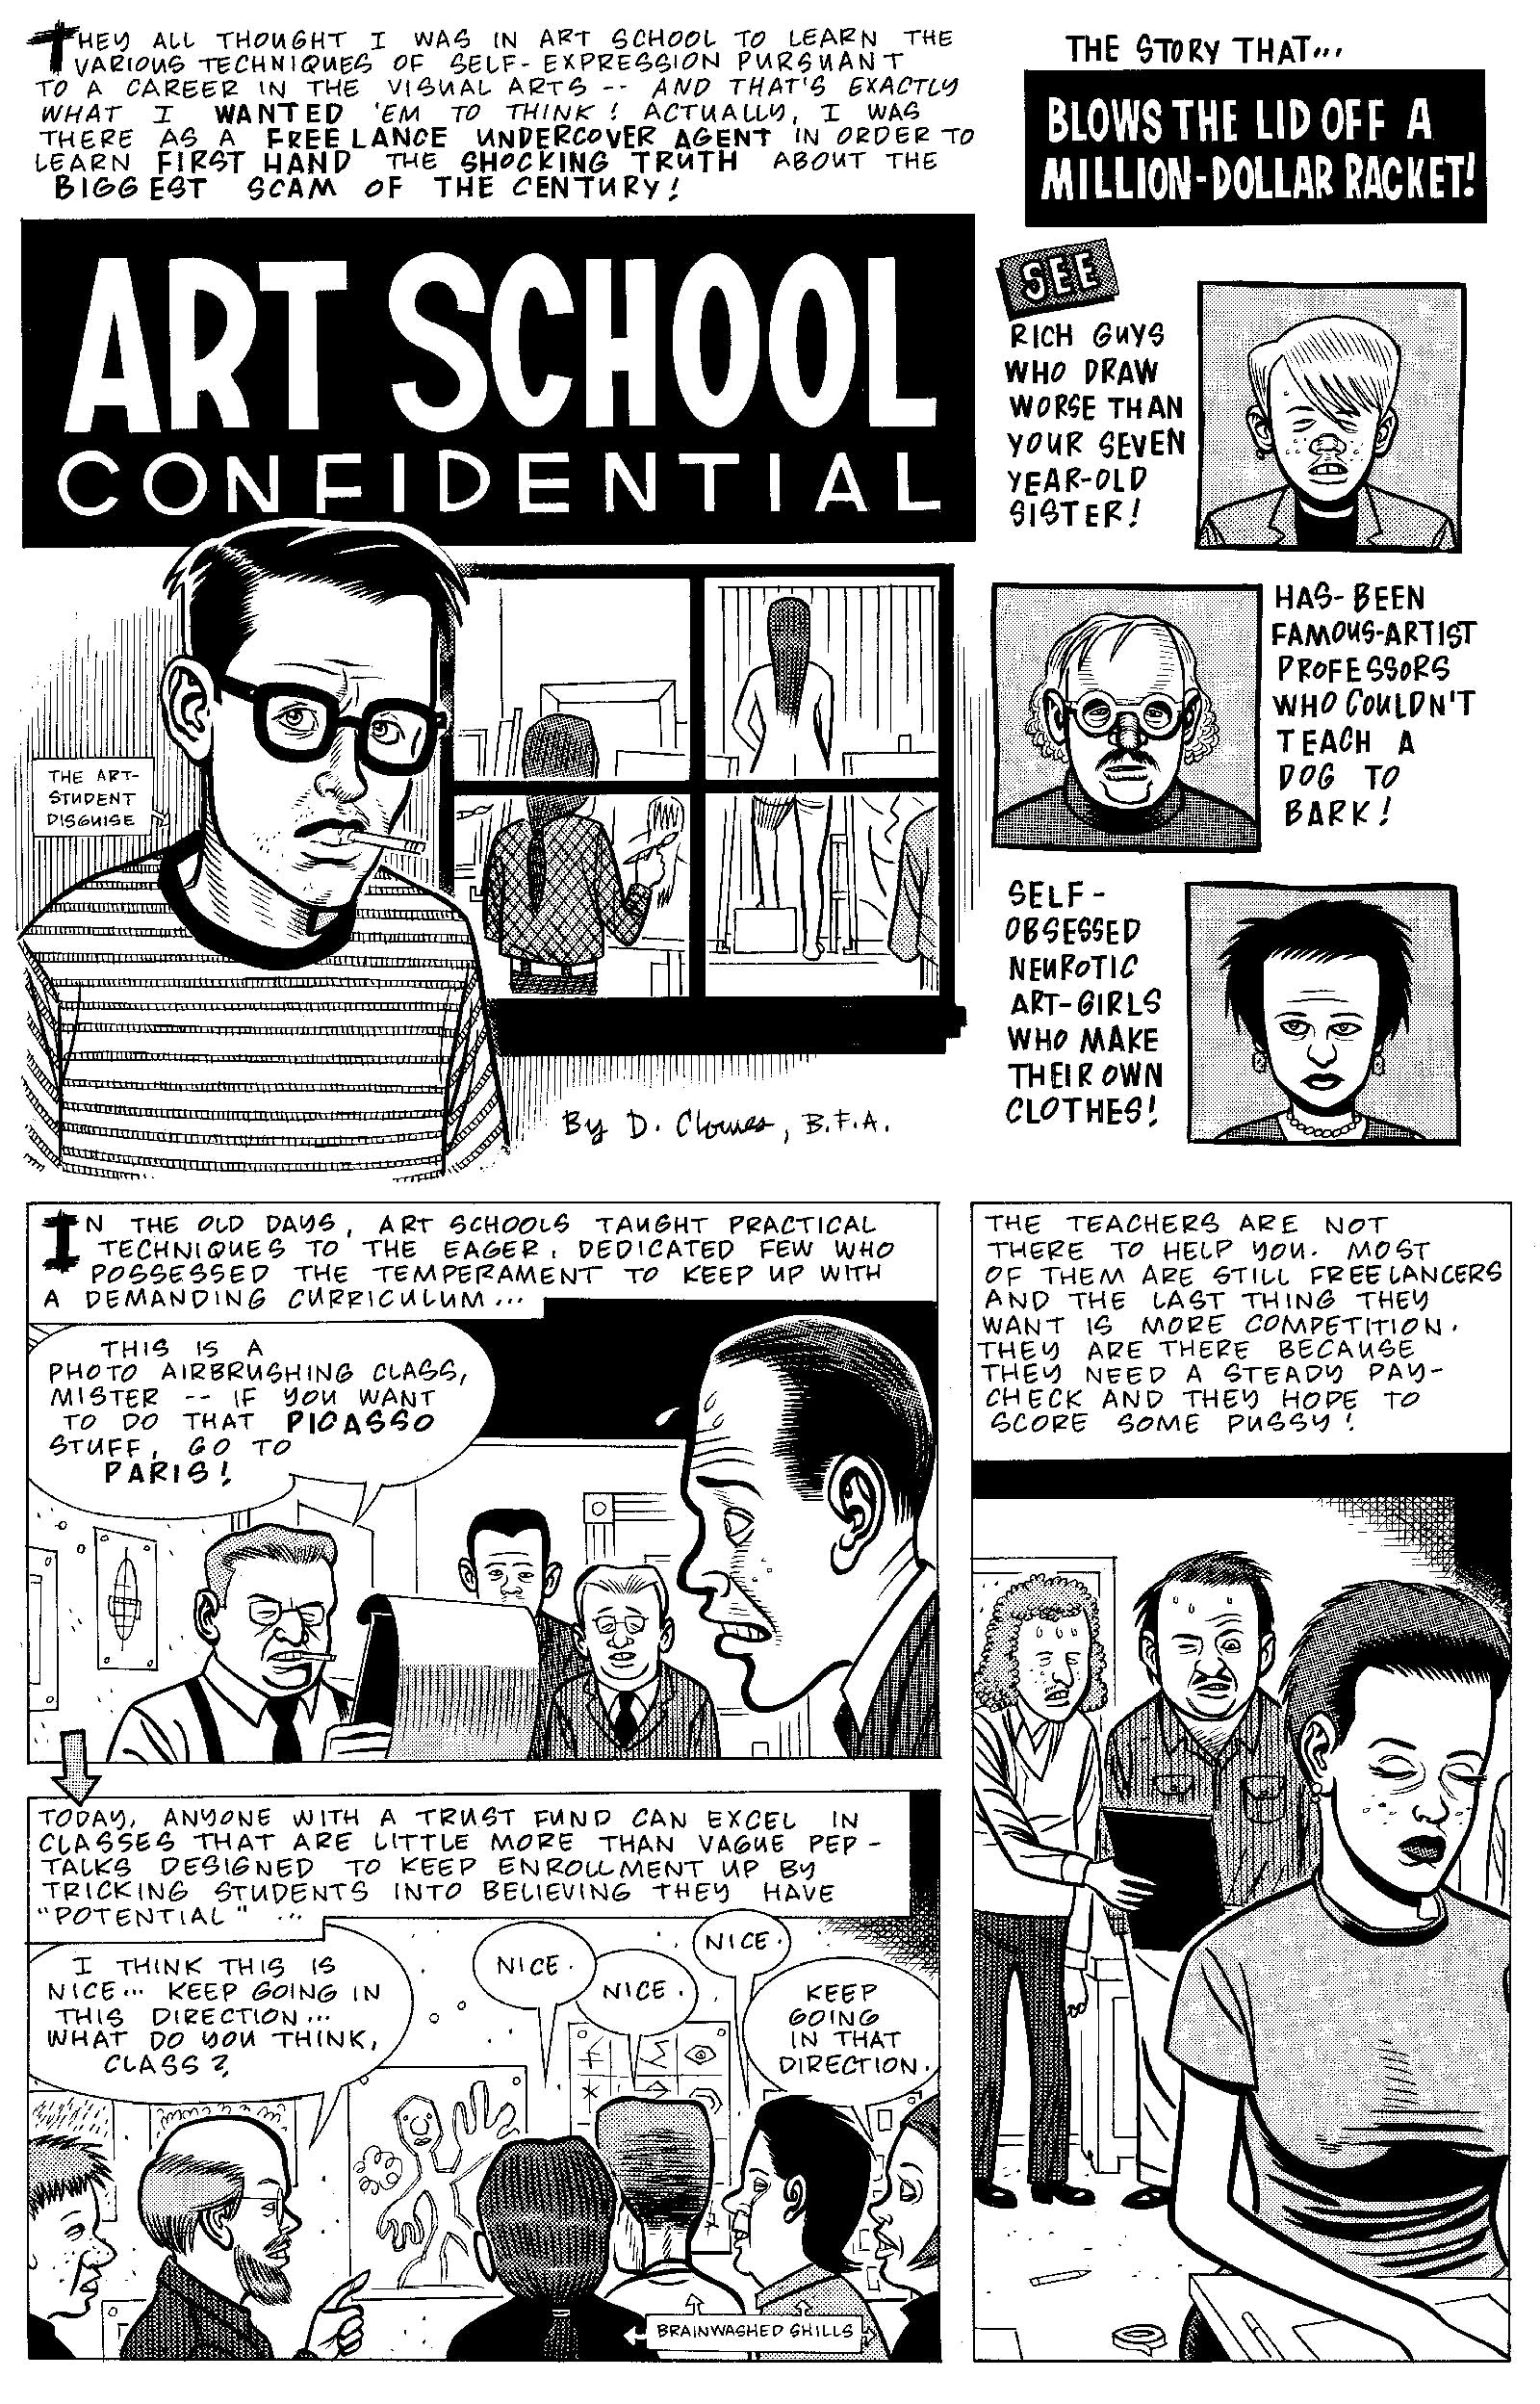 A page from Daniel Clowes’s ‘Art School Confidential’